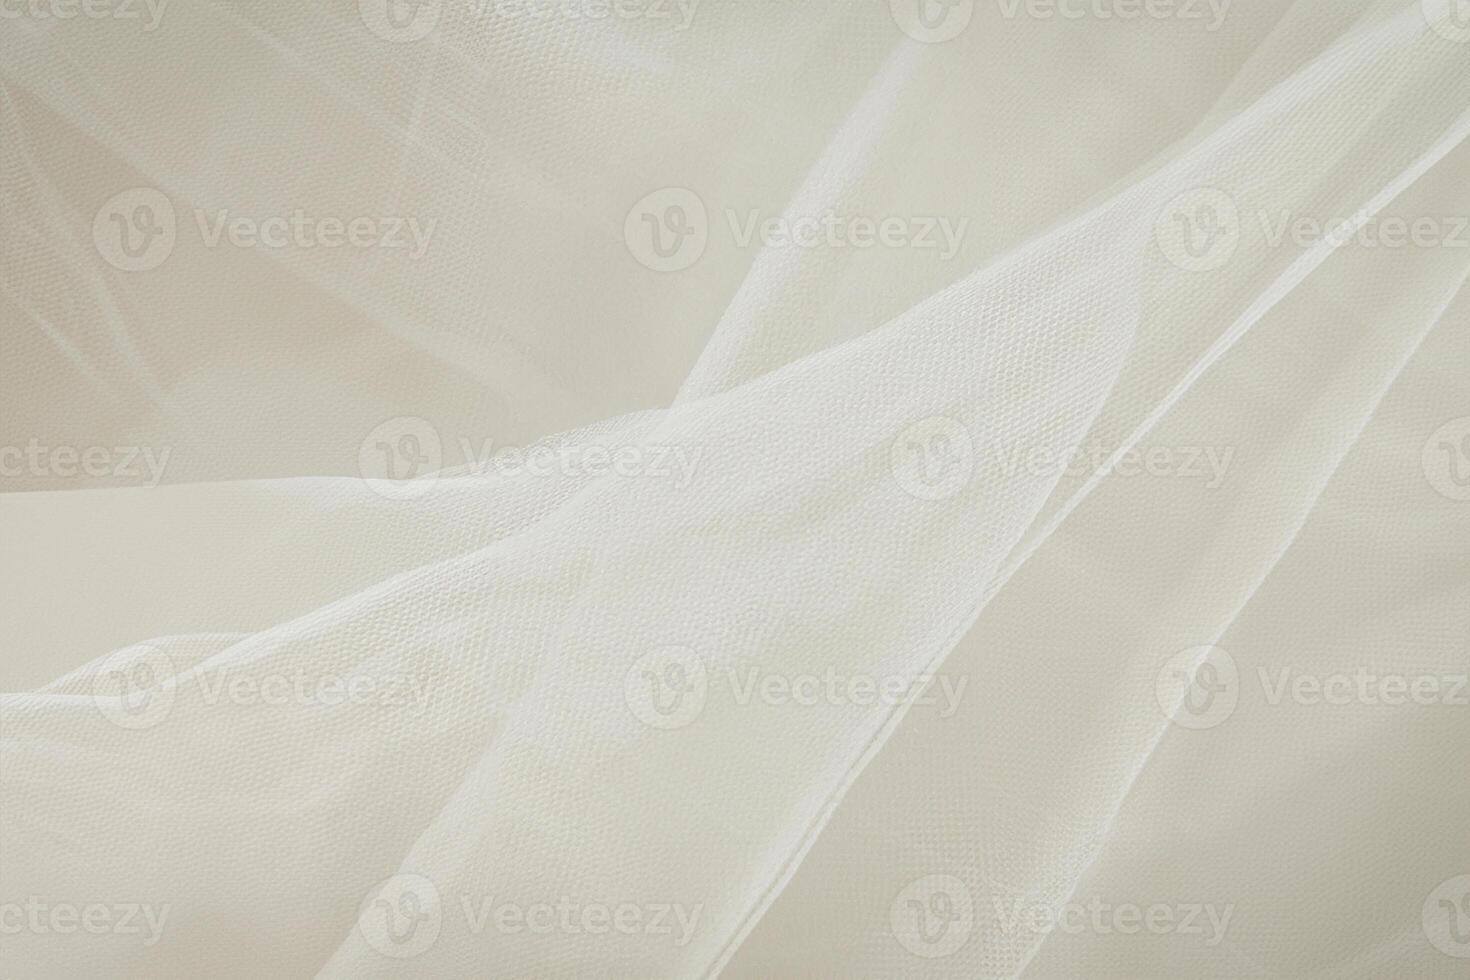 Details of the bride dress fabric and beautiful embroidery wedding concept used as a background for illustrations. photo